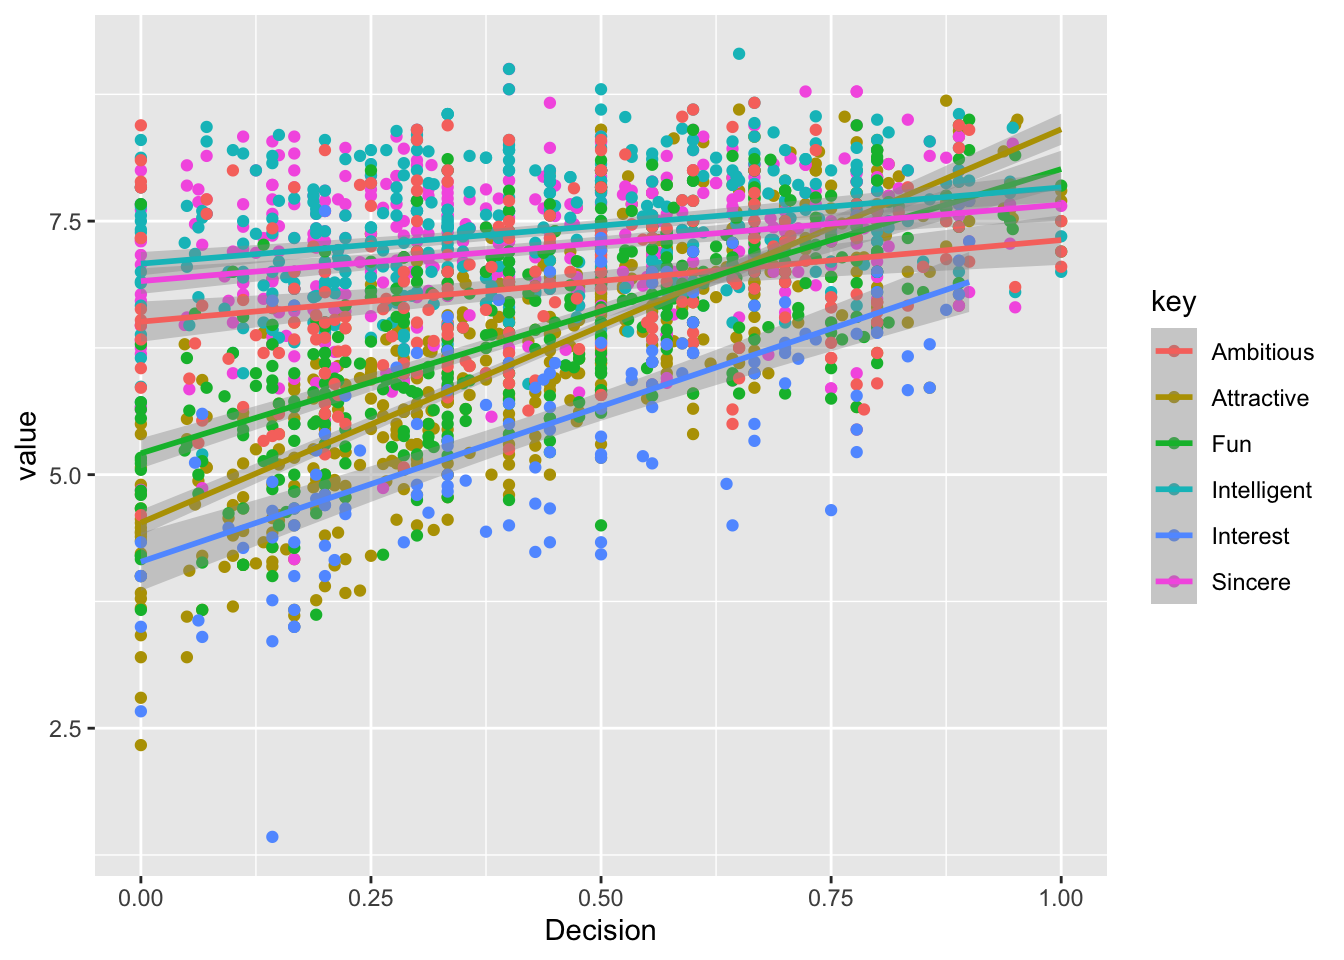 Six overlapping trend lines on a single plot are overwhelming for the viewer.